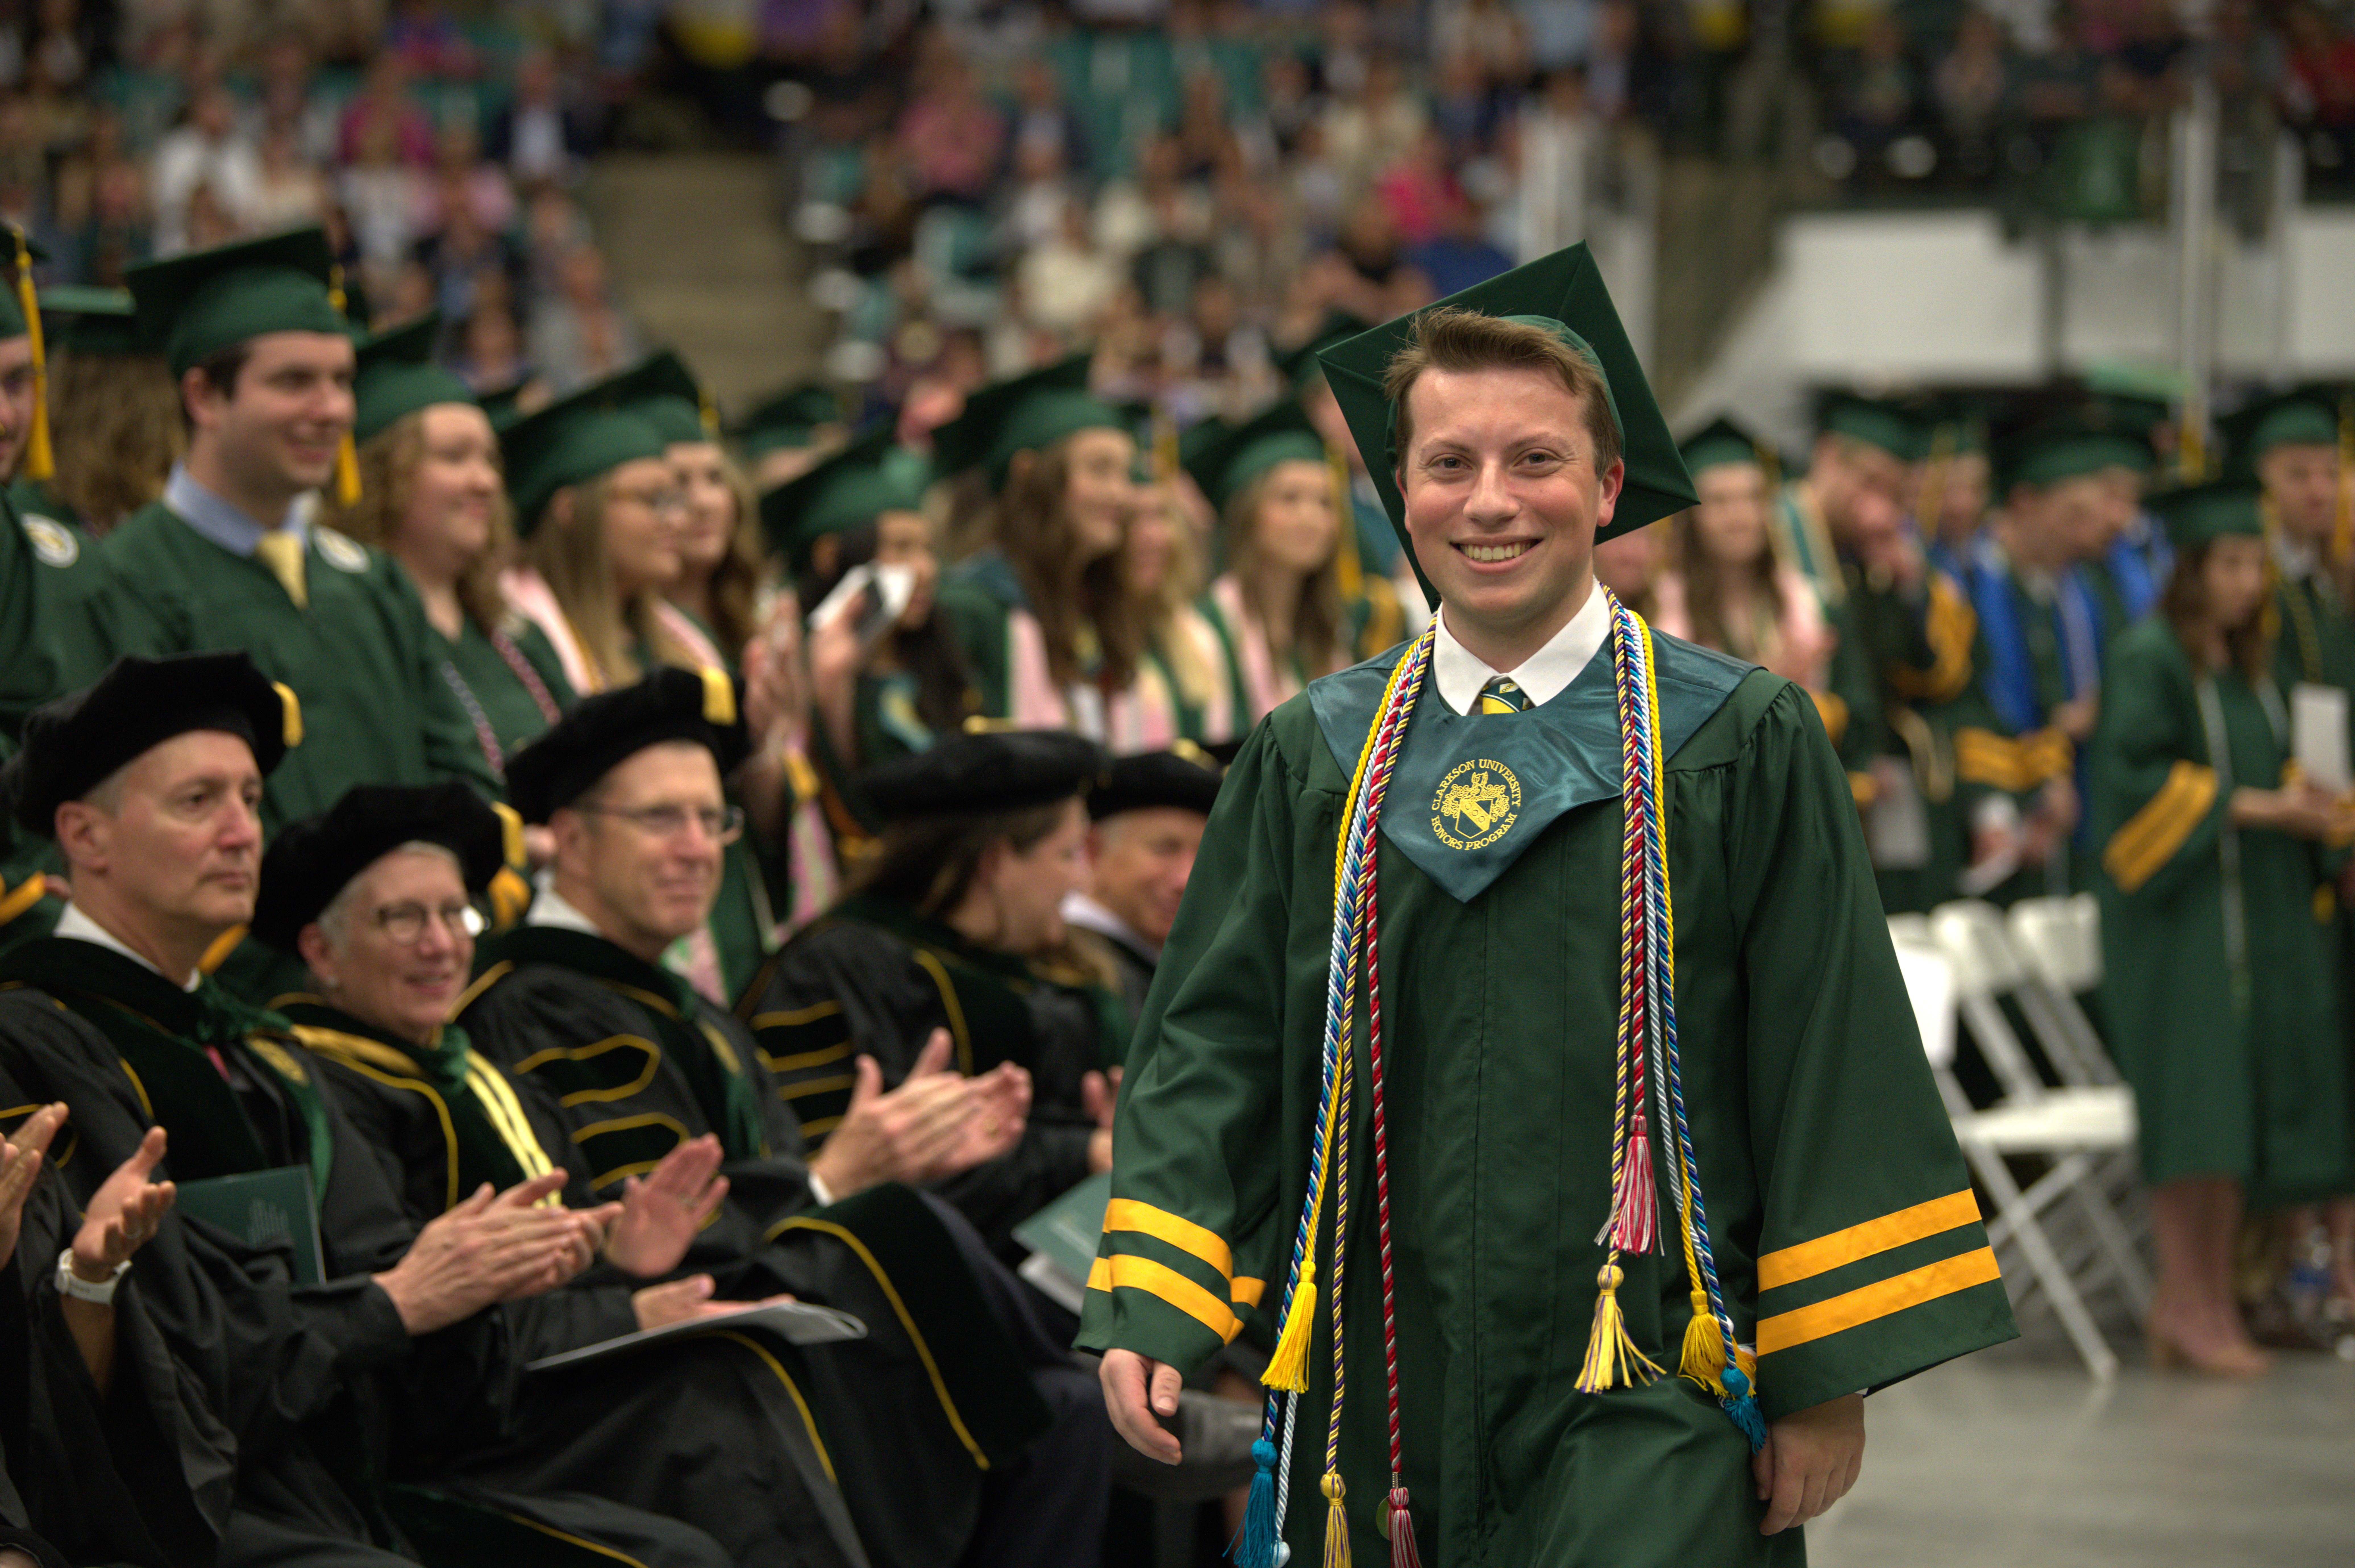 A student in regalia smiles as he walks past peers at commencement.